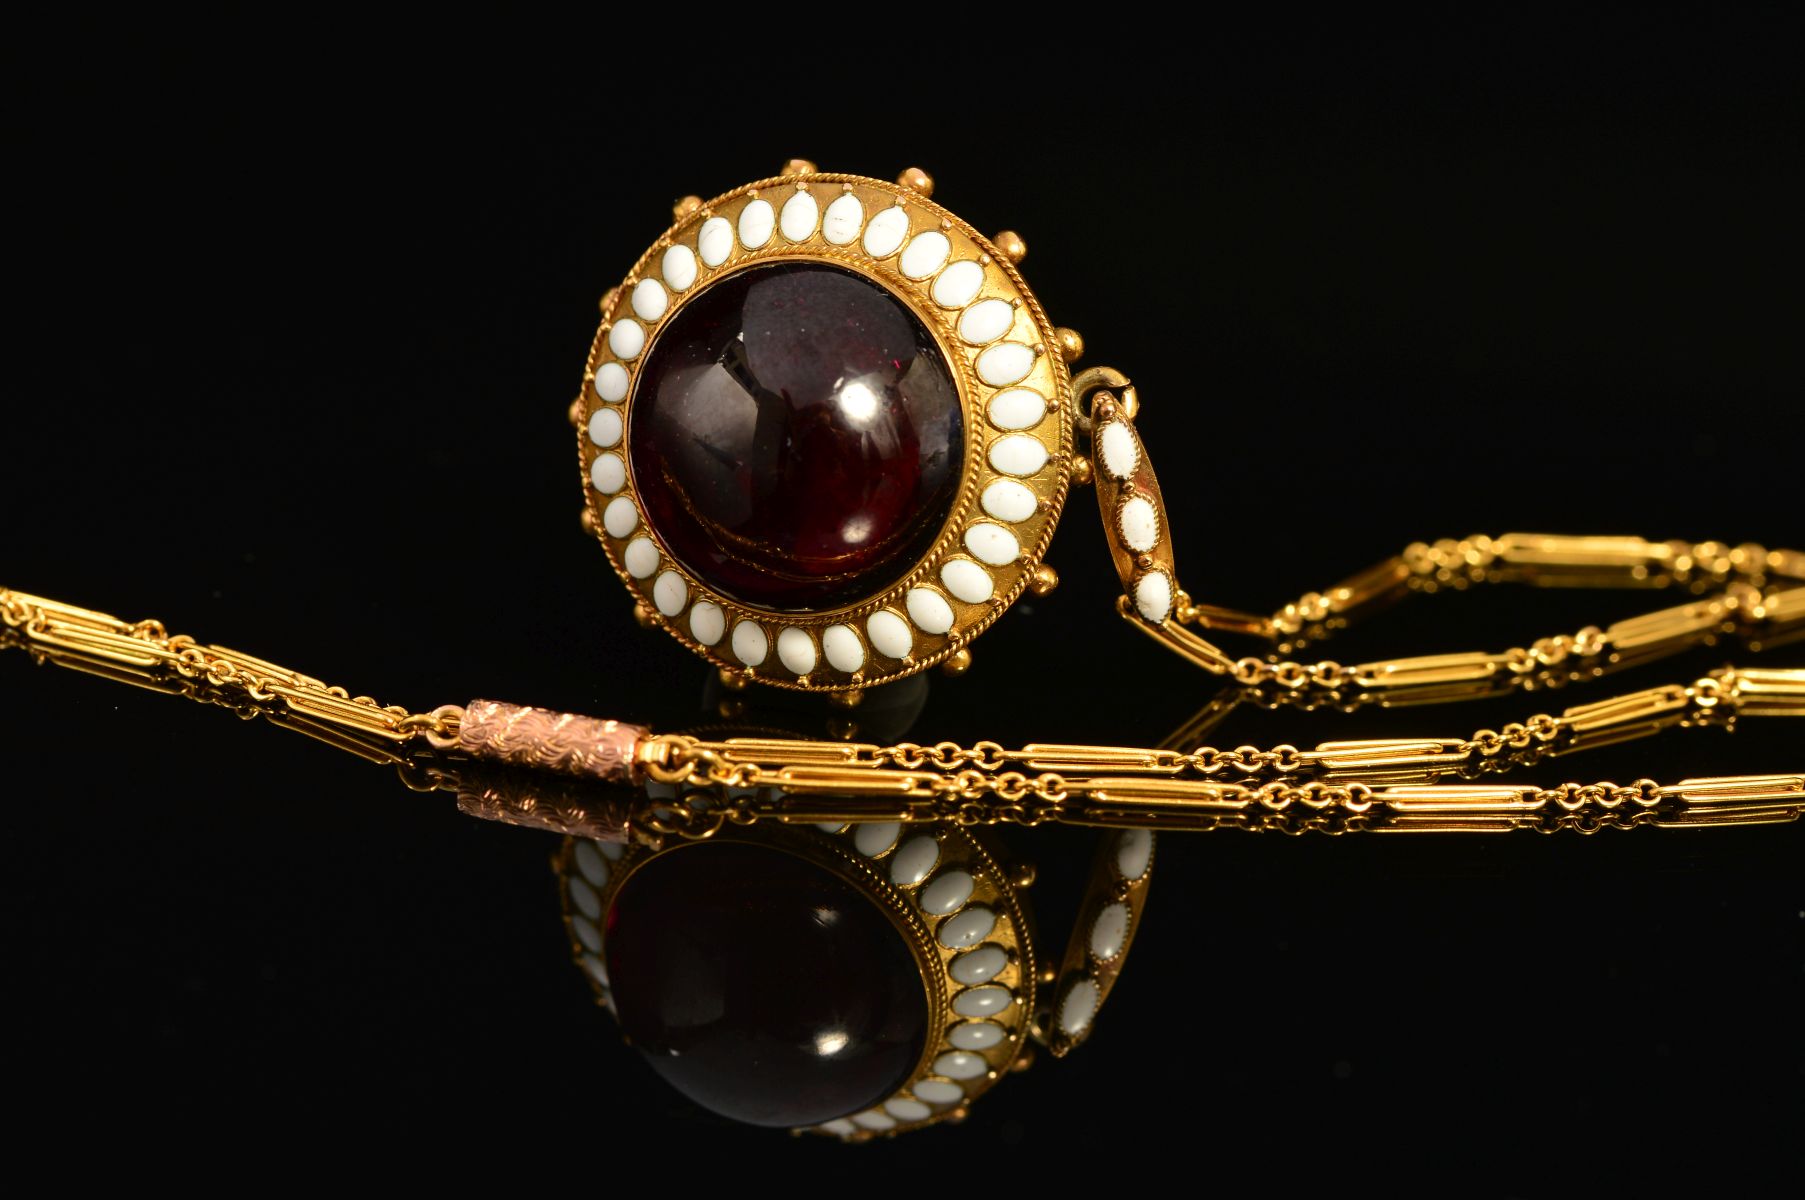 A MID VICTORIAN GOLD GARNET AND WHITE ENAMEL PENDANT, centring on a large cabochon circular garnet - Image 3 of 5